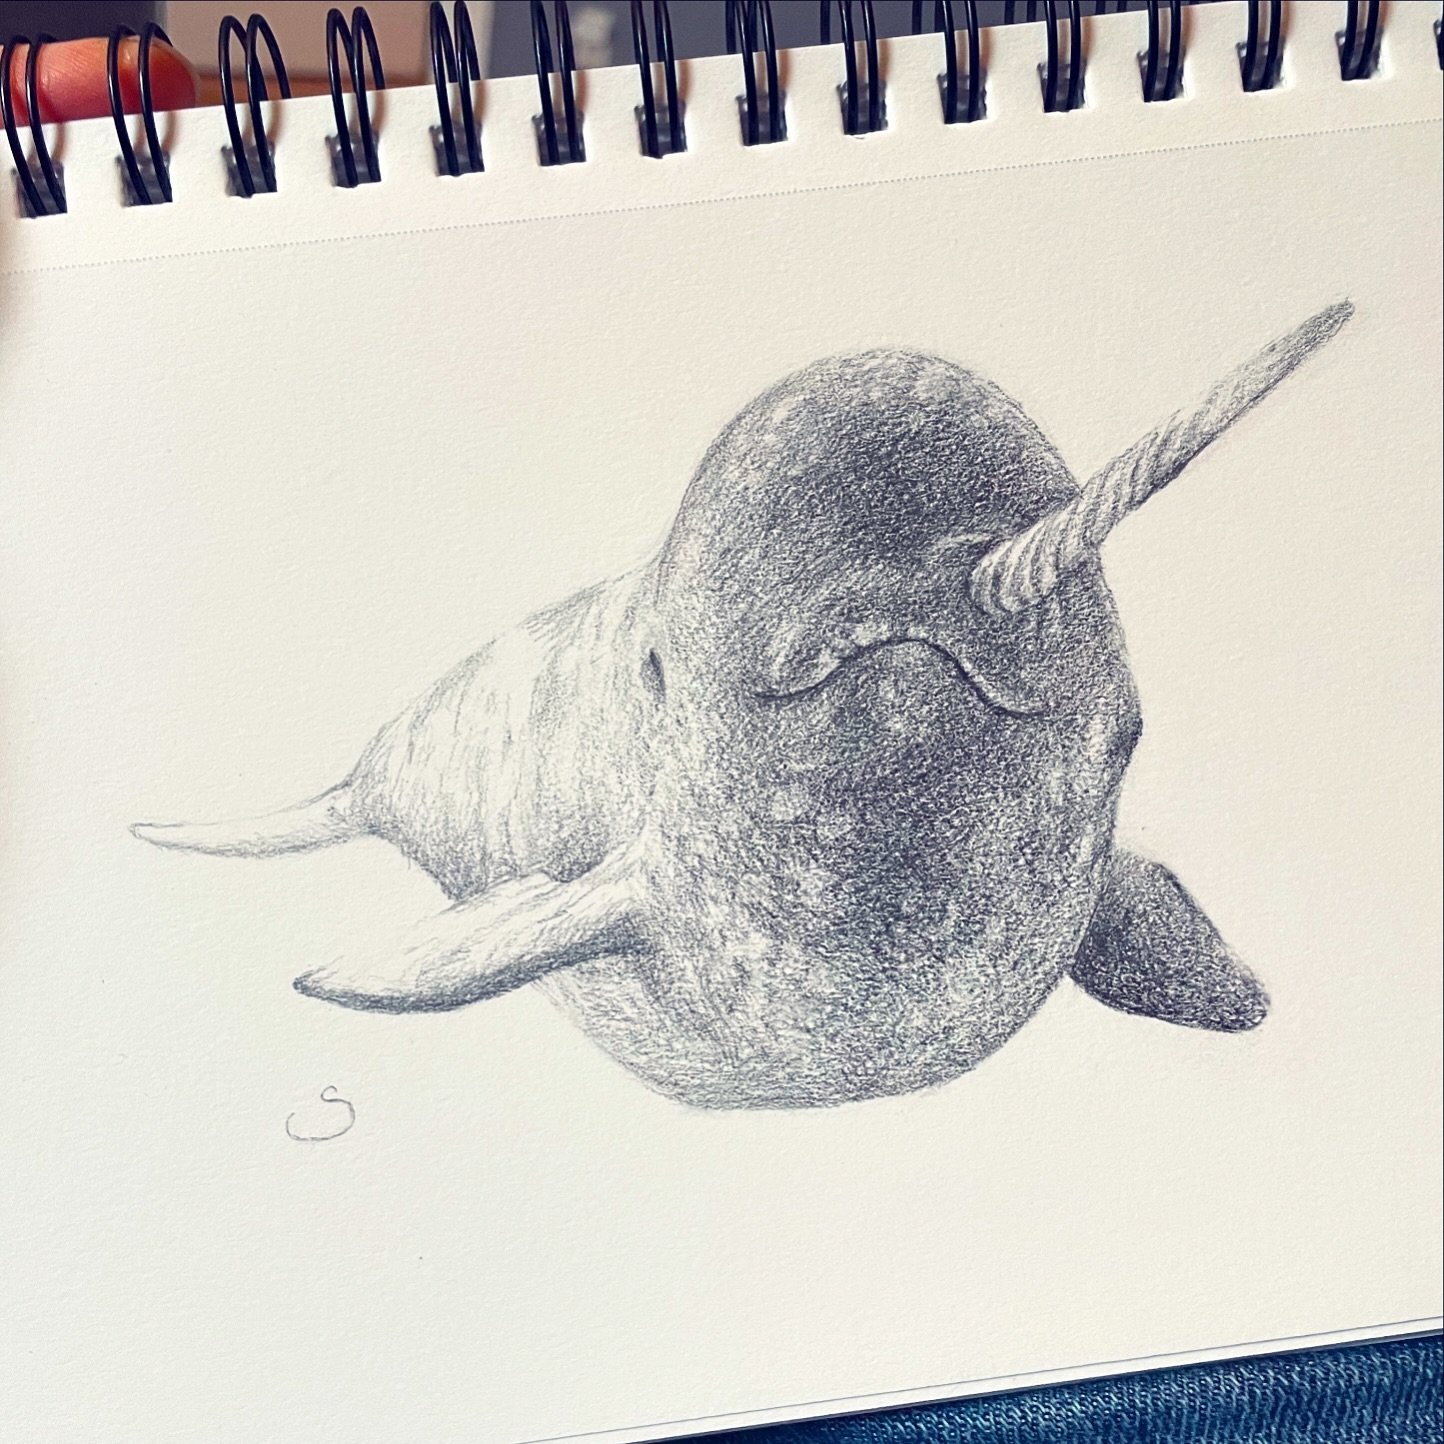 Oh hey there little Narwhal. You&rsquo;re a cutie. 
.
I need to get back to this Animalia series. In true &ldquo;Sarah&rdquo; form I have abandoned it just before it was finished&hellip;. So let&rsquo;s gooooo! I have one more batch to go to get to 1